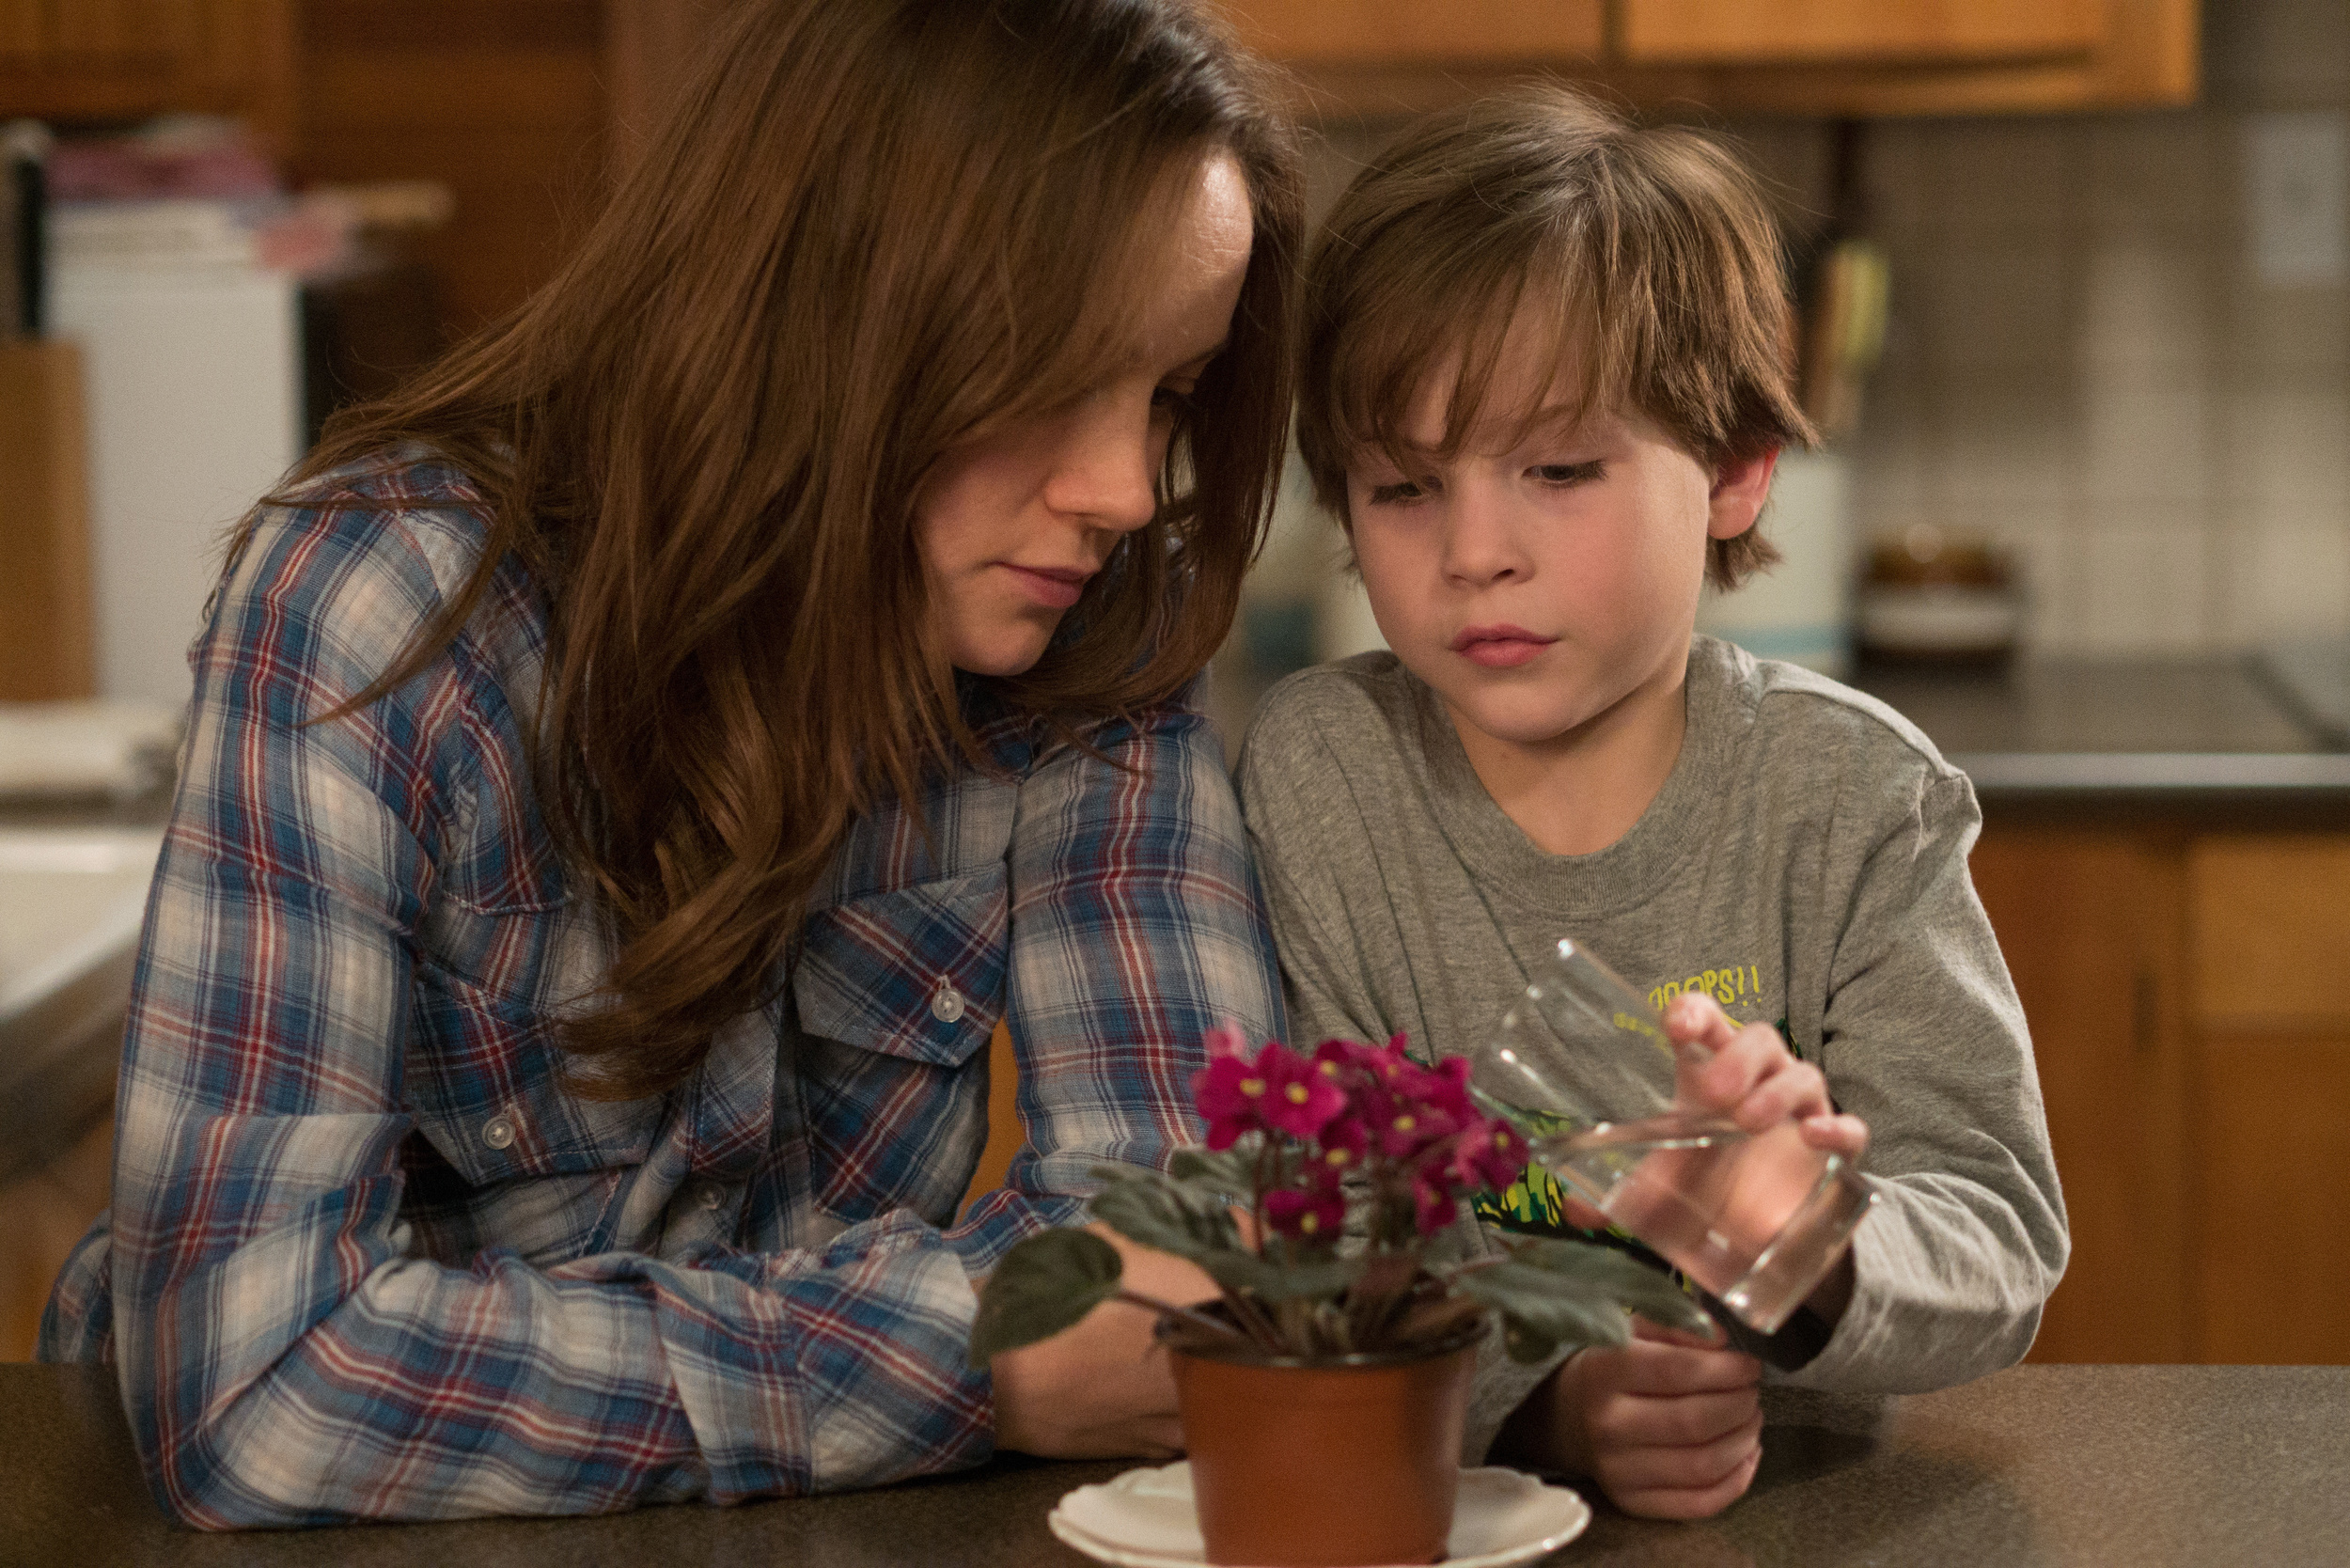 <p>The novel <em>Room</em> has many, many fans, but so does the film. Brie Larson and Jacob Tremblay did a fantastic job of bringing the main characters to life, and they perfectly portrayed the emotional toll that type of trauma puts on two people and the bond they can form through experiencing it together. </p><p><a href='https://www.msn.com/en-us/community/channel/vid-cj9pqbr0vn9in2b6ddcd8sfgpfq6x6utp44fssrv6mc2gtybw0us'>Follow us on MSN to see more of our exclusive entertainment content.</a></p>